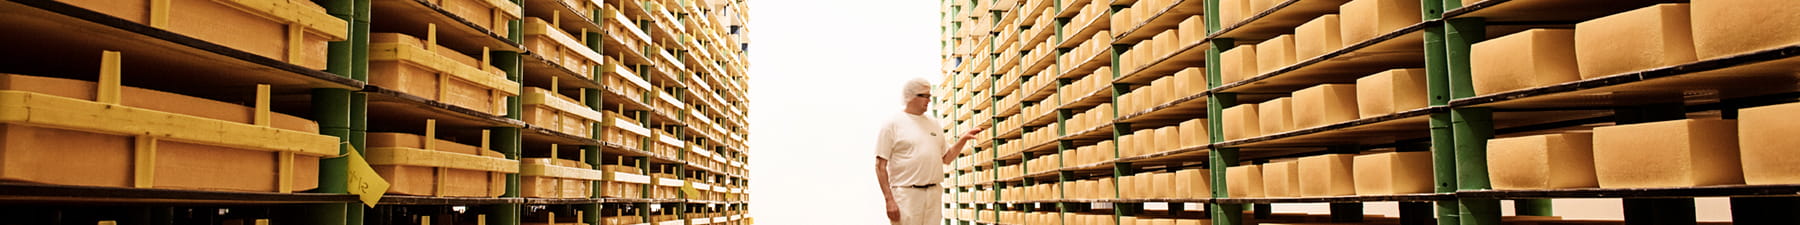 Rows of cheese in a storage room